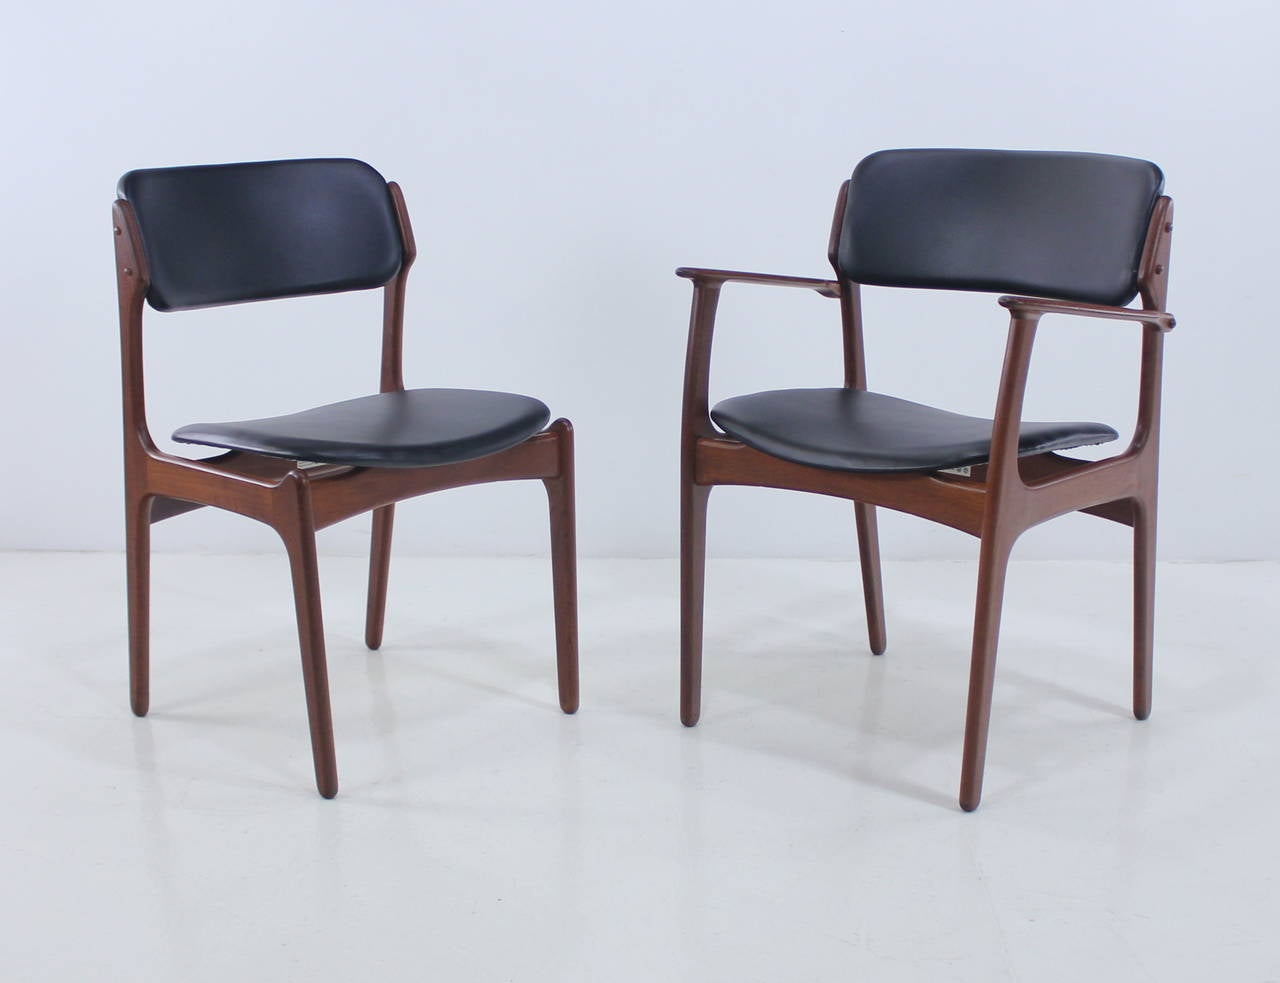 Eight dining chairs with floating seats designed by Erik Buck.
Includes one armchair.
Richly grained teak, newly upholstered in highest quality, black leather-like vinyl.
Armchair measures 24.25" W x 19" D x 32" H.
Professionally